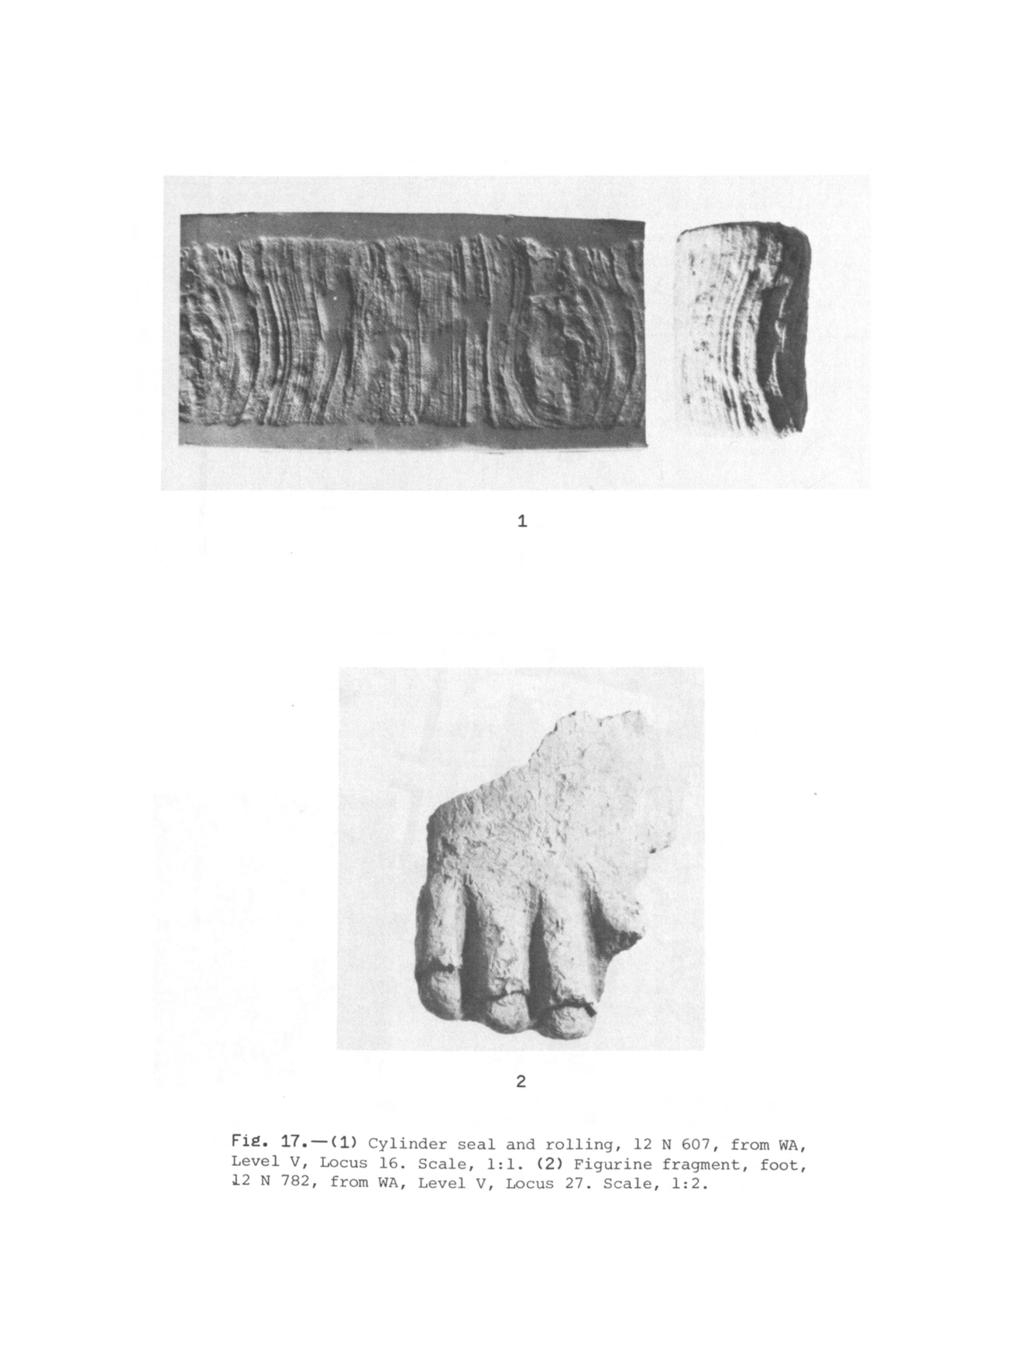 o : a Fig. 17.-(1) Cylinder seal and rolling, 12 N 607, from WA, Level V, Locus 16.